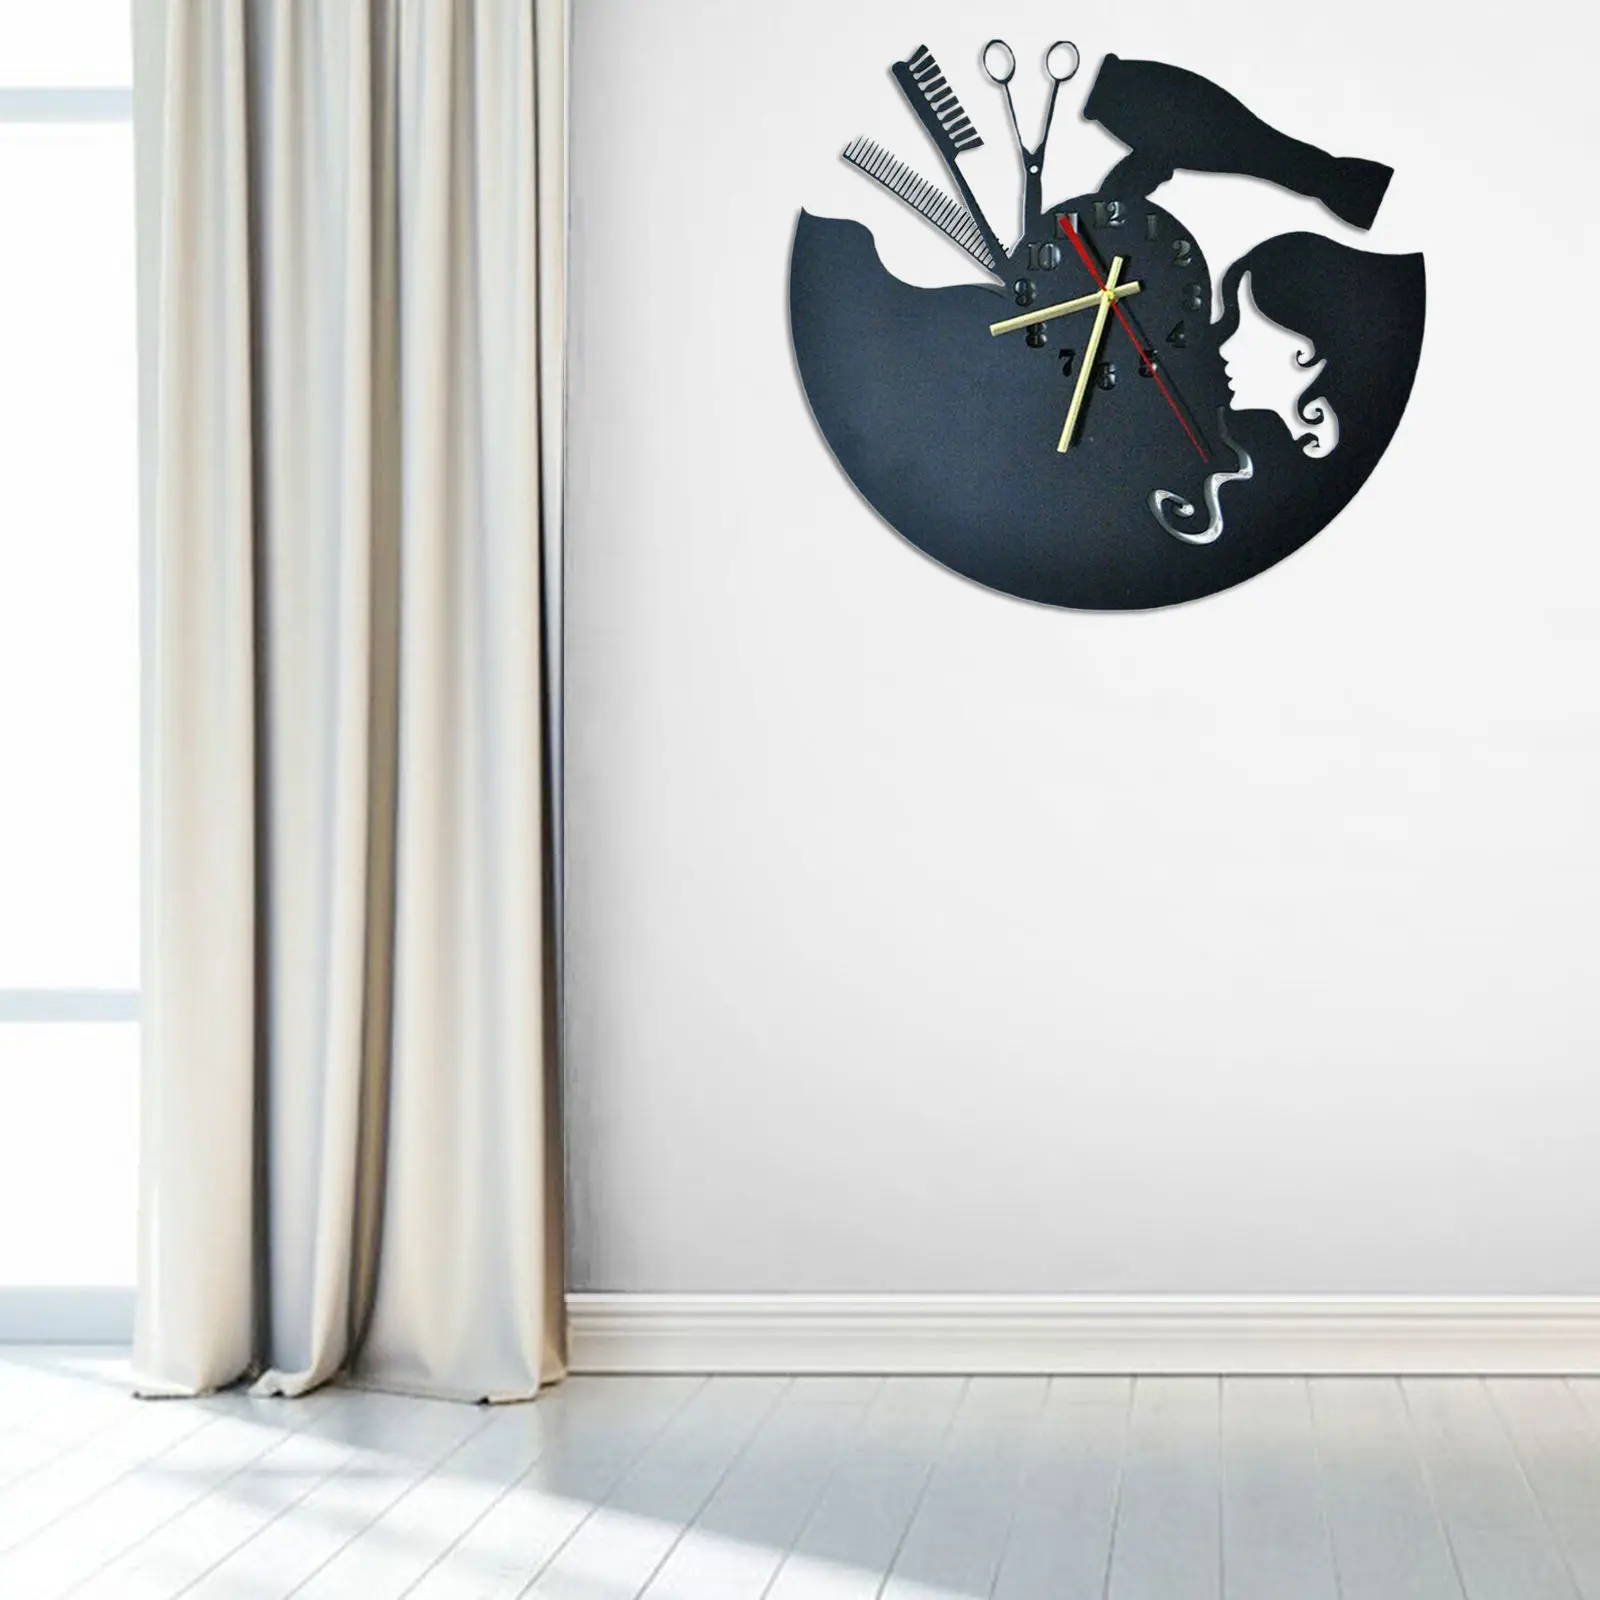 Hairdresser Wall Clock Wood Battery Operated Retro for Art Decorations Classroom Home Office